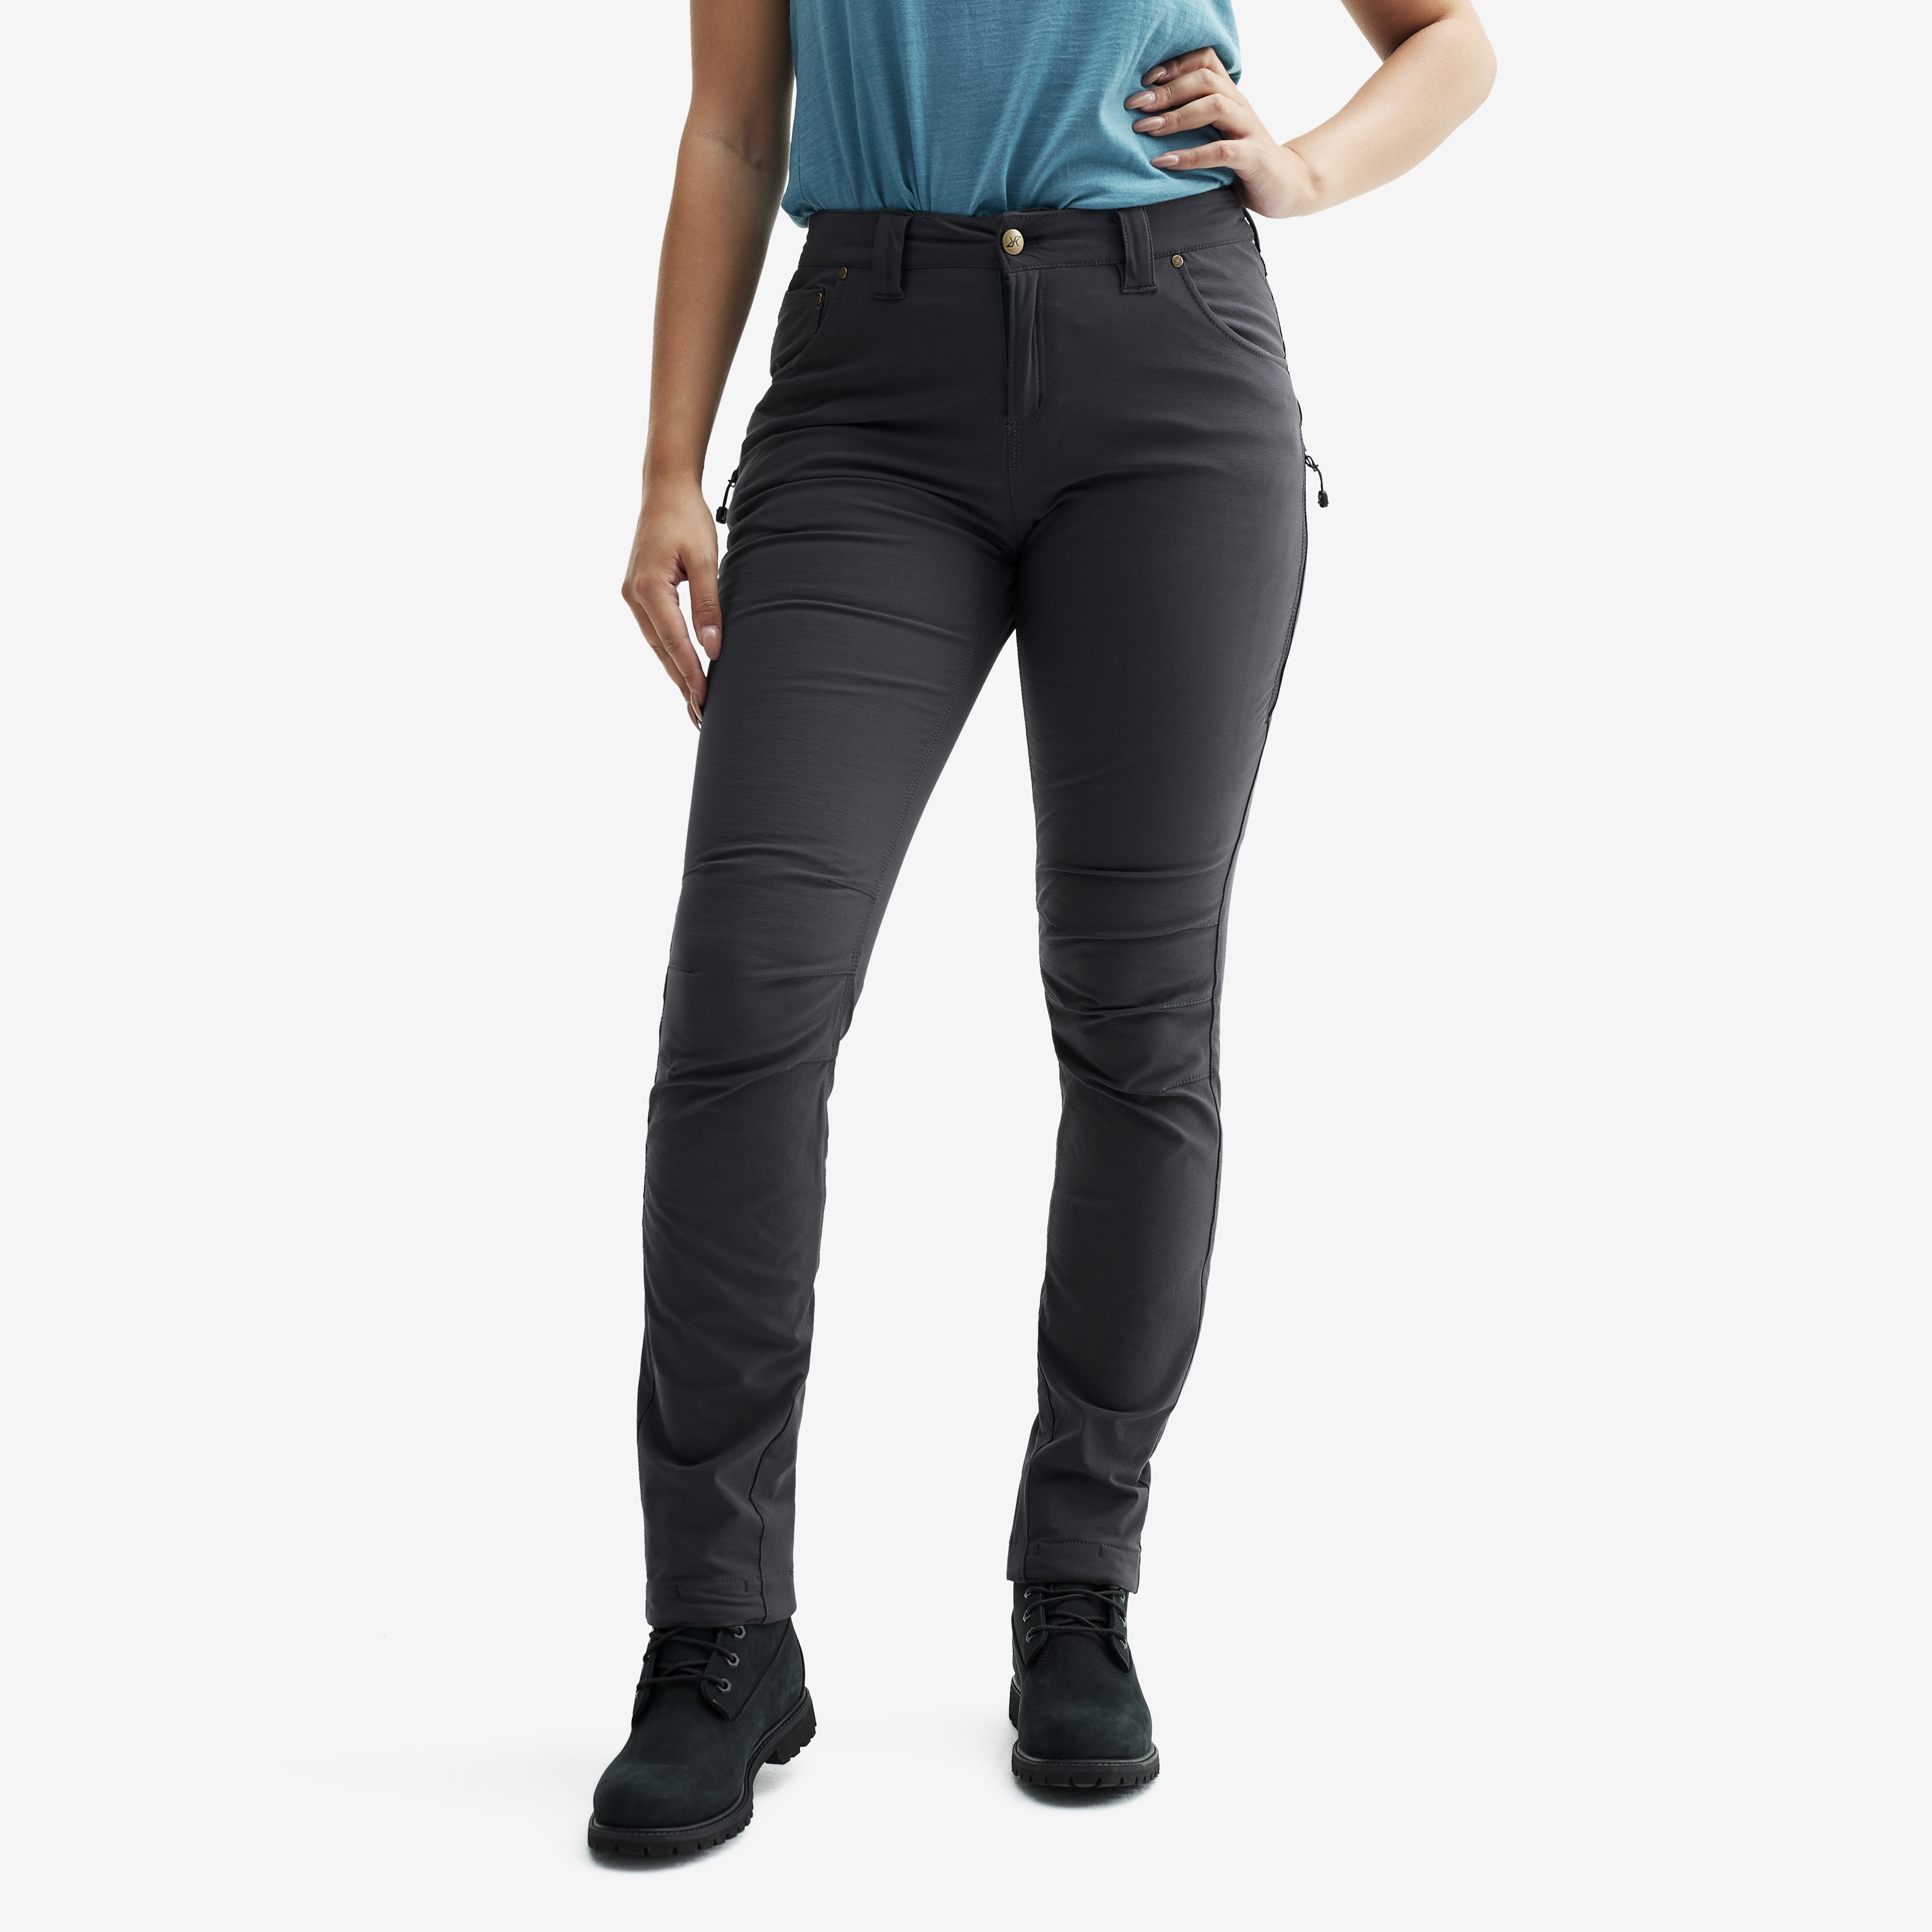 Adrenaline Outdoor Jeans Anthracite Edition Mujeres